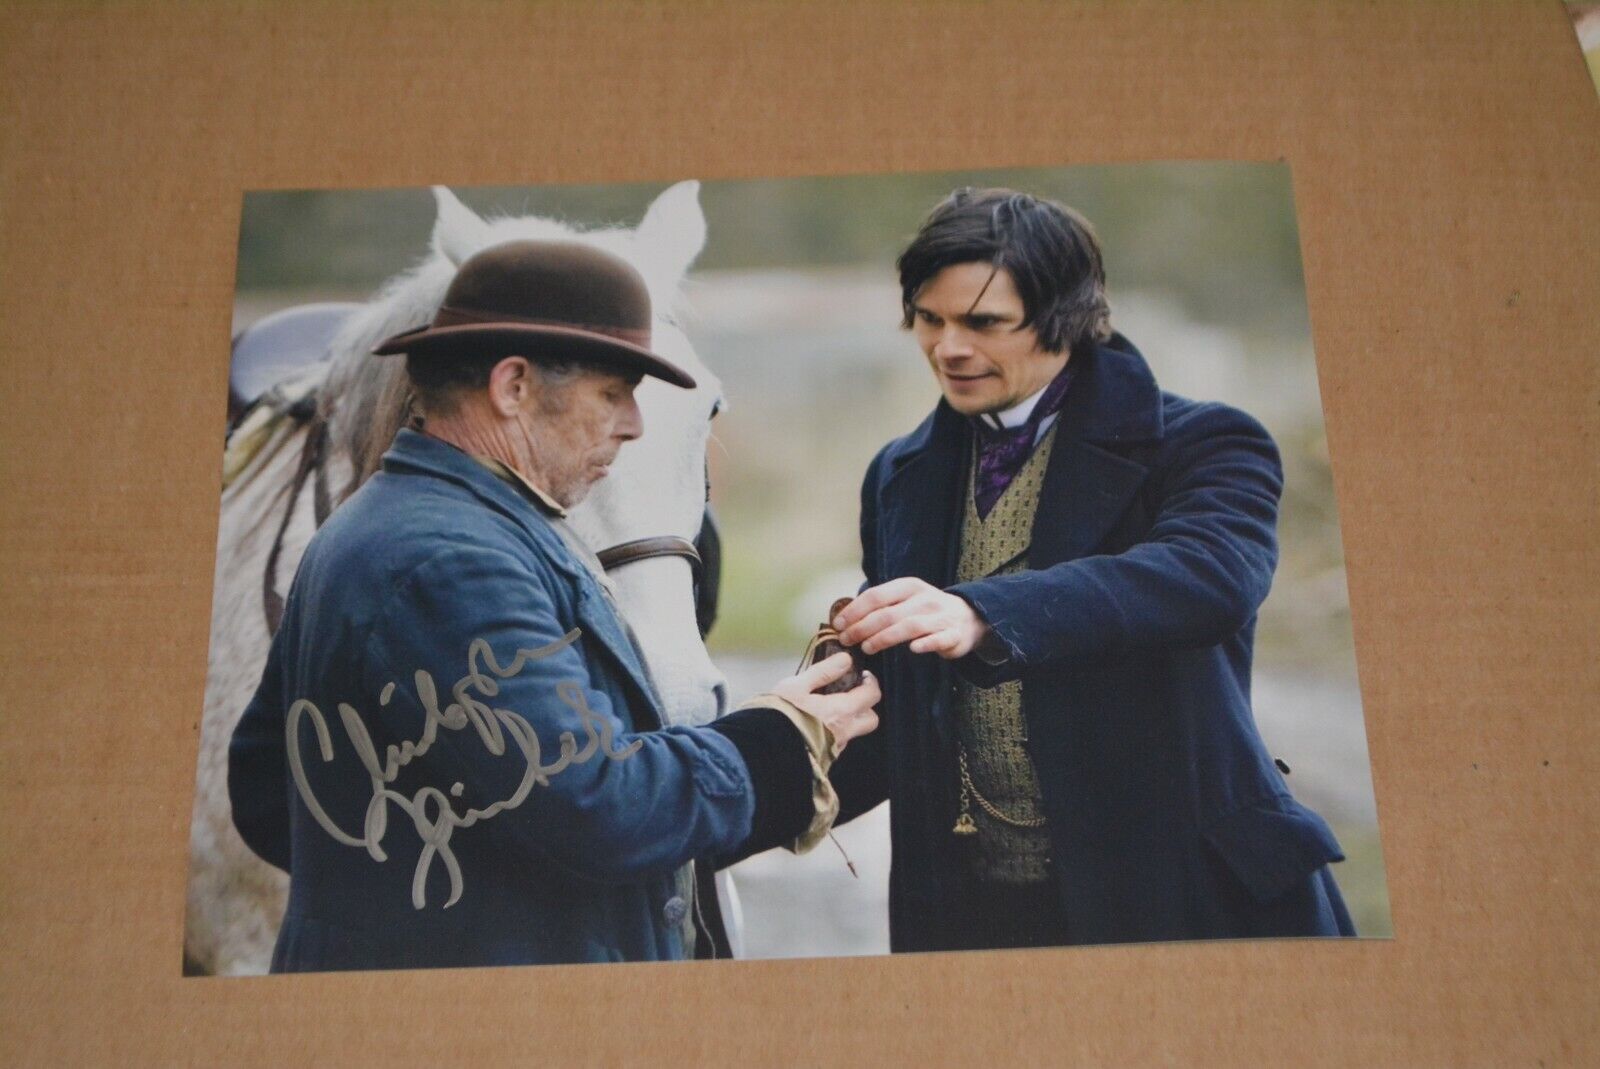 CHRISTOPHER FAIRBANK signed autograph In Person 8x10 TESS OF THE D'UBERVILLES